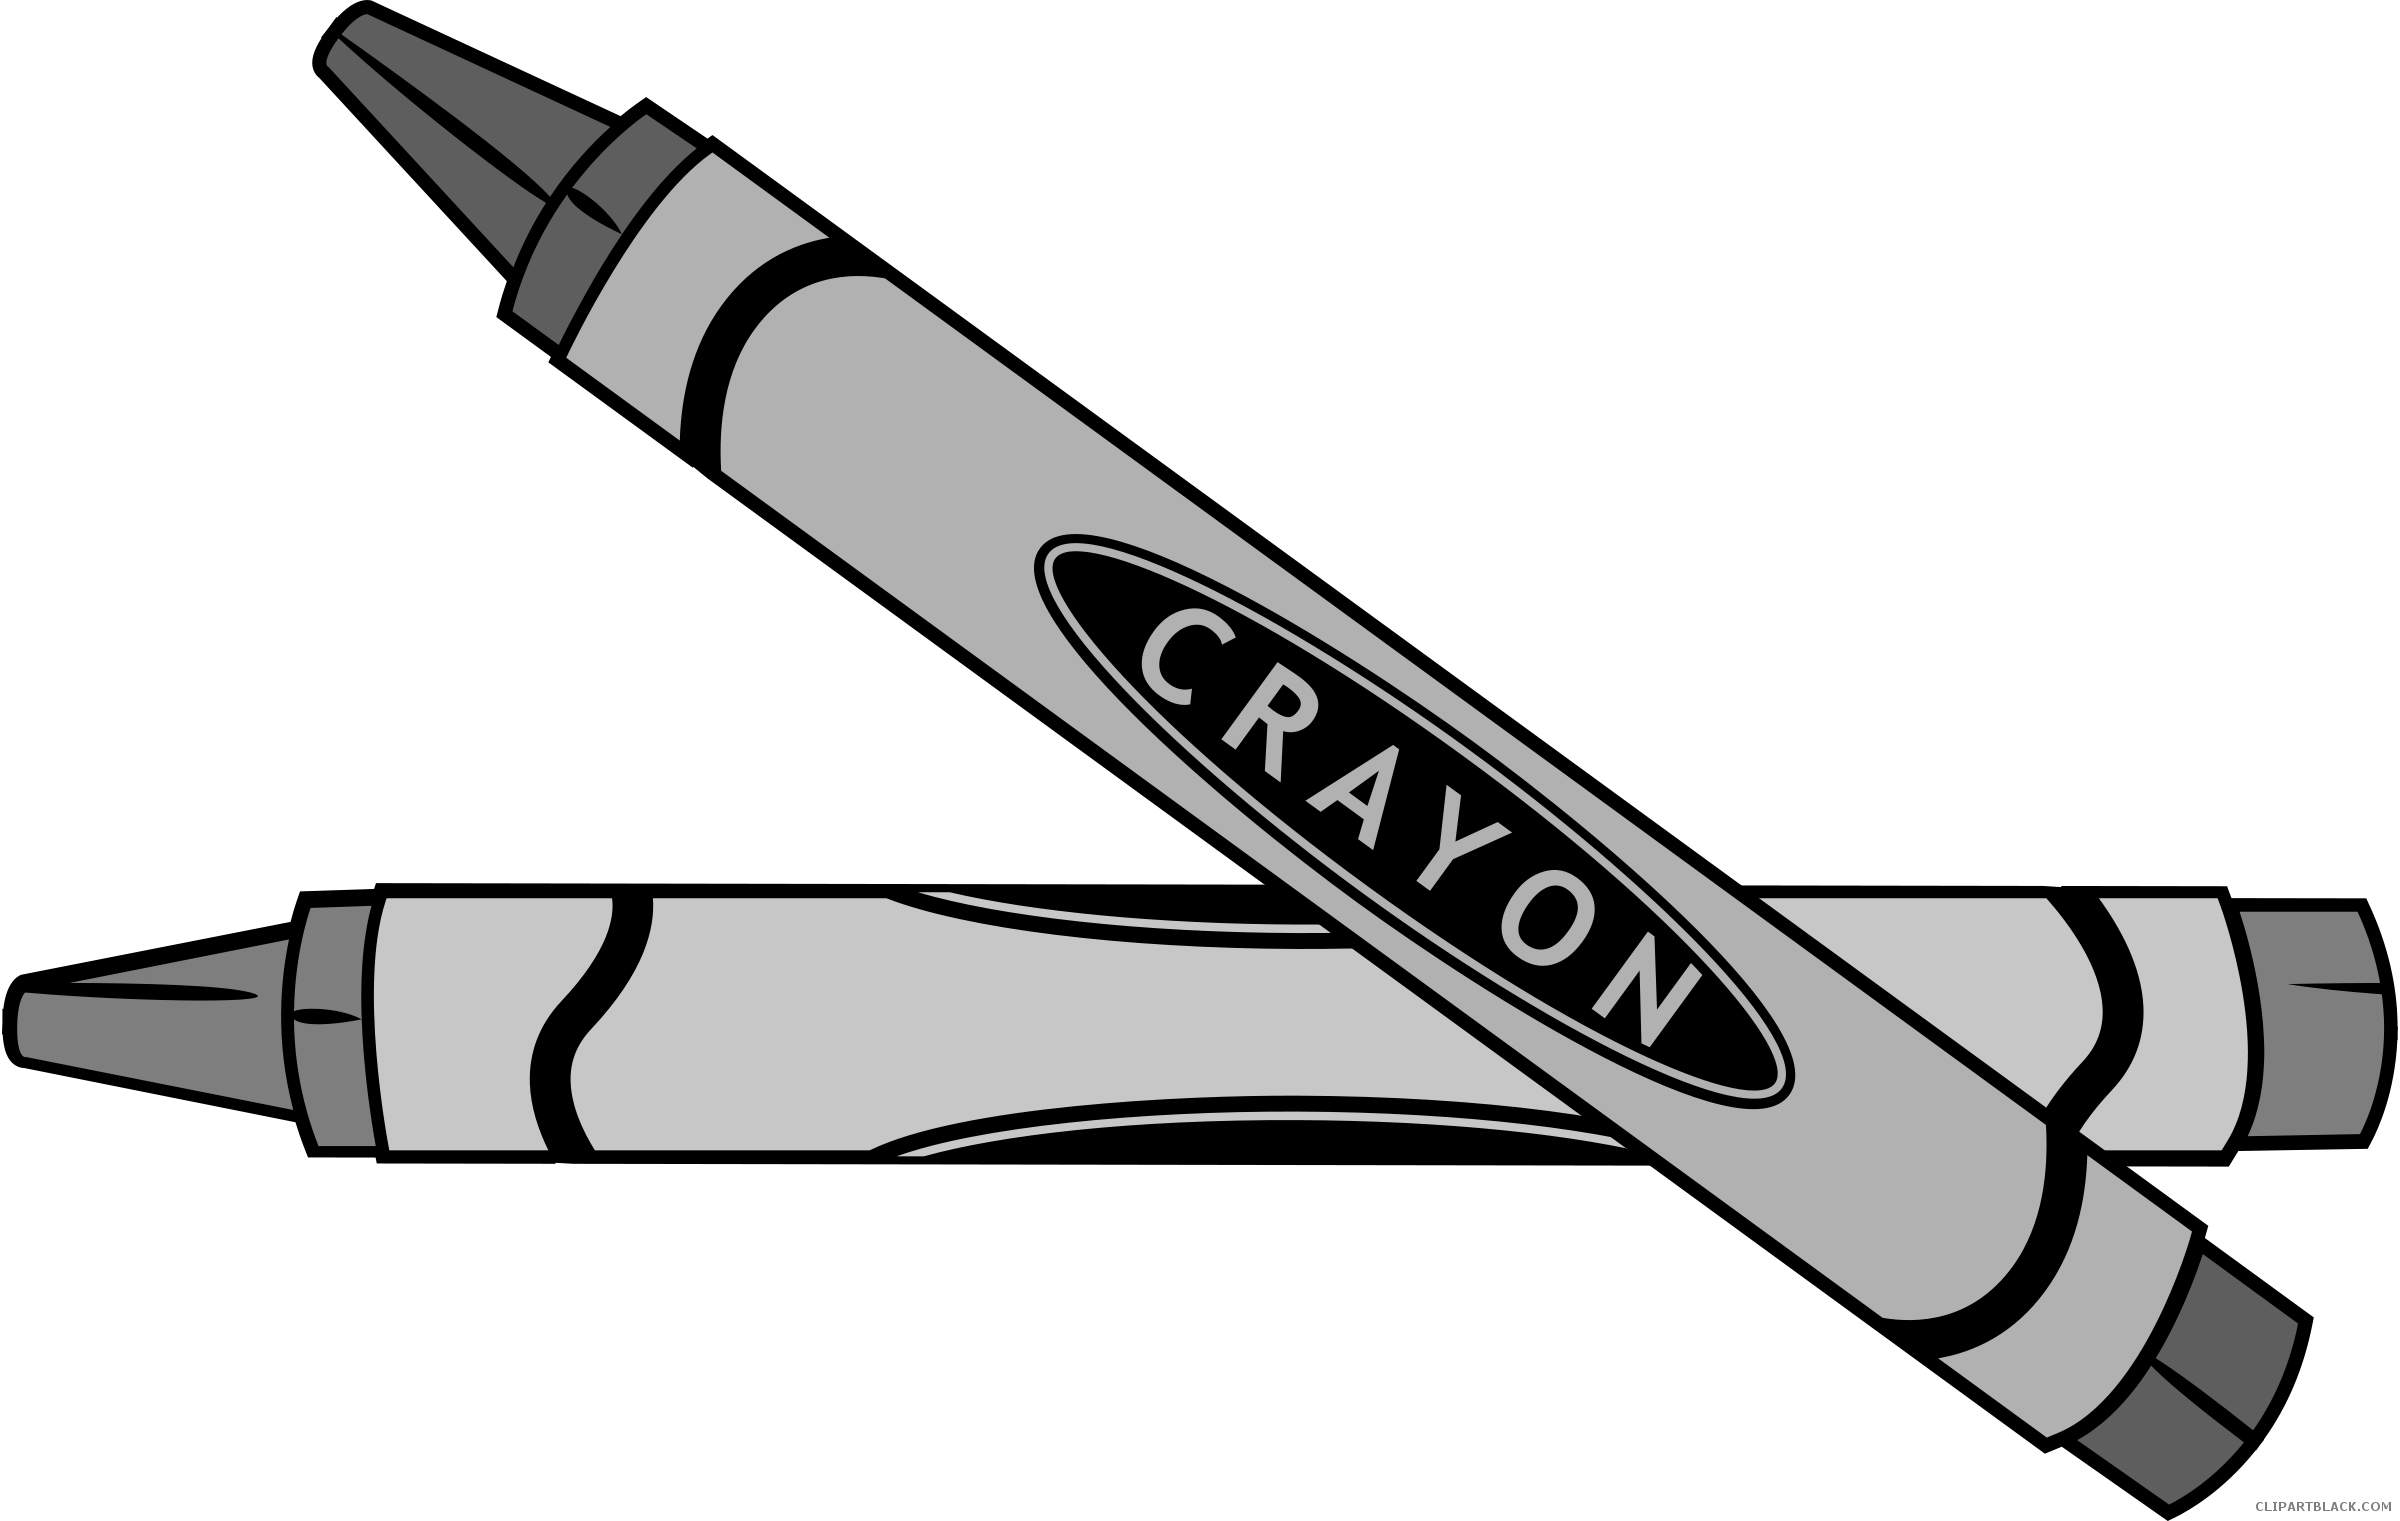 Crayon page of clipartblack. Crayons clipart black and white